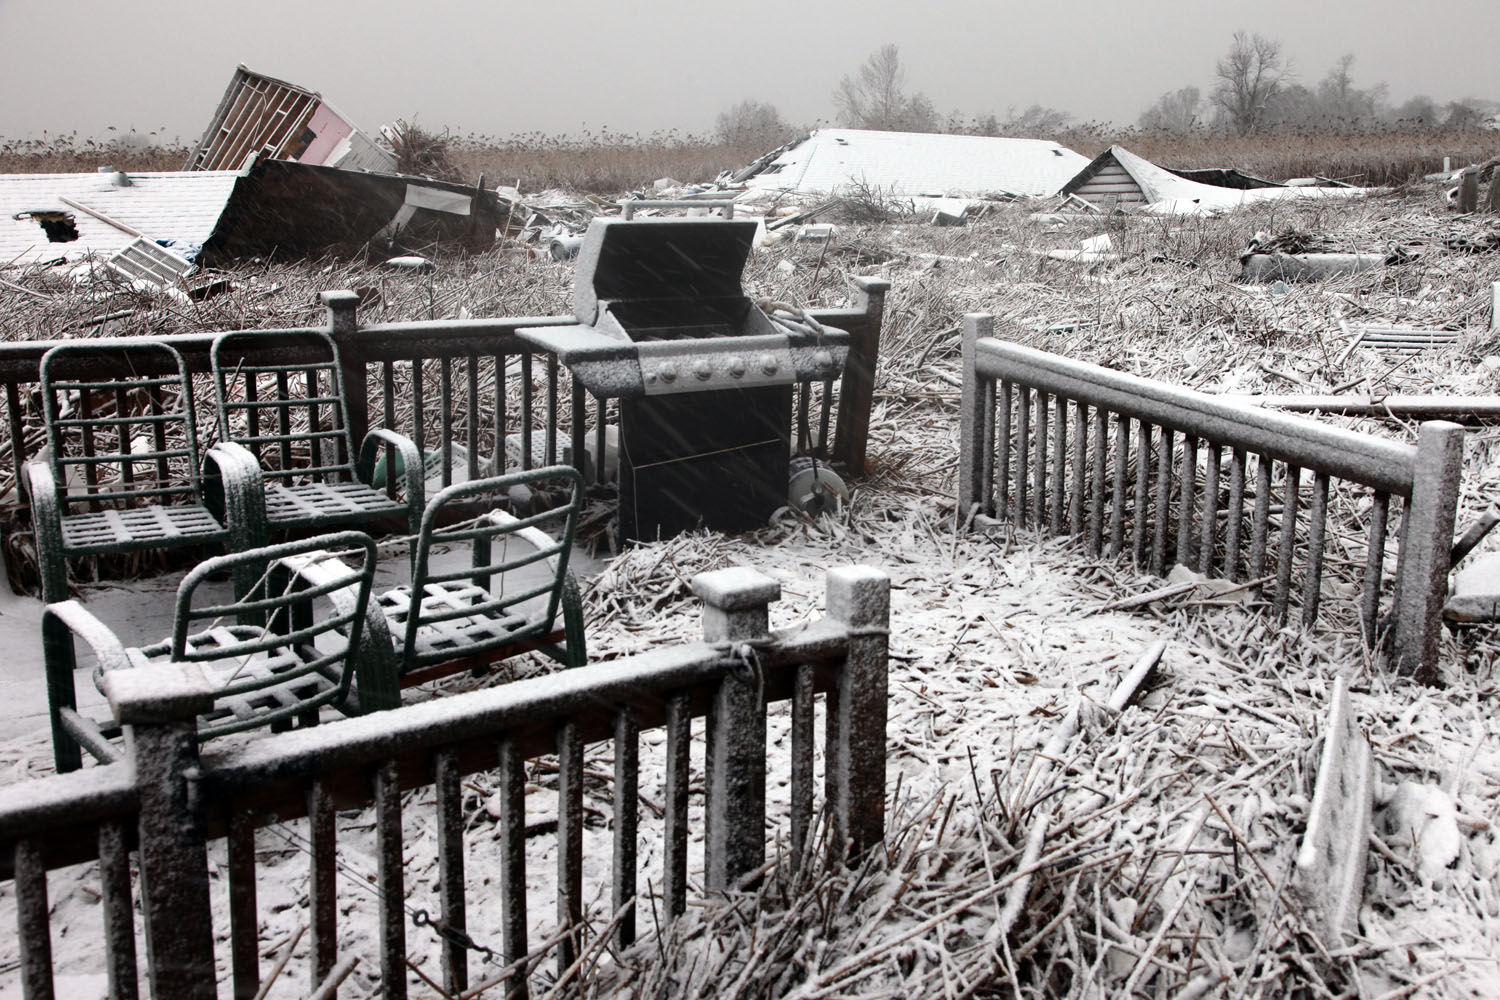 Image: Nor’Easter snow settles on decks and roofs carried by flood water and wind from Kissam Avenue to the marsh along Mill Road during Superstorm Sandy.